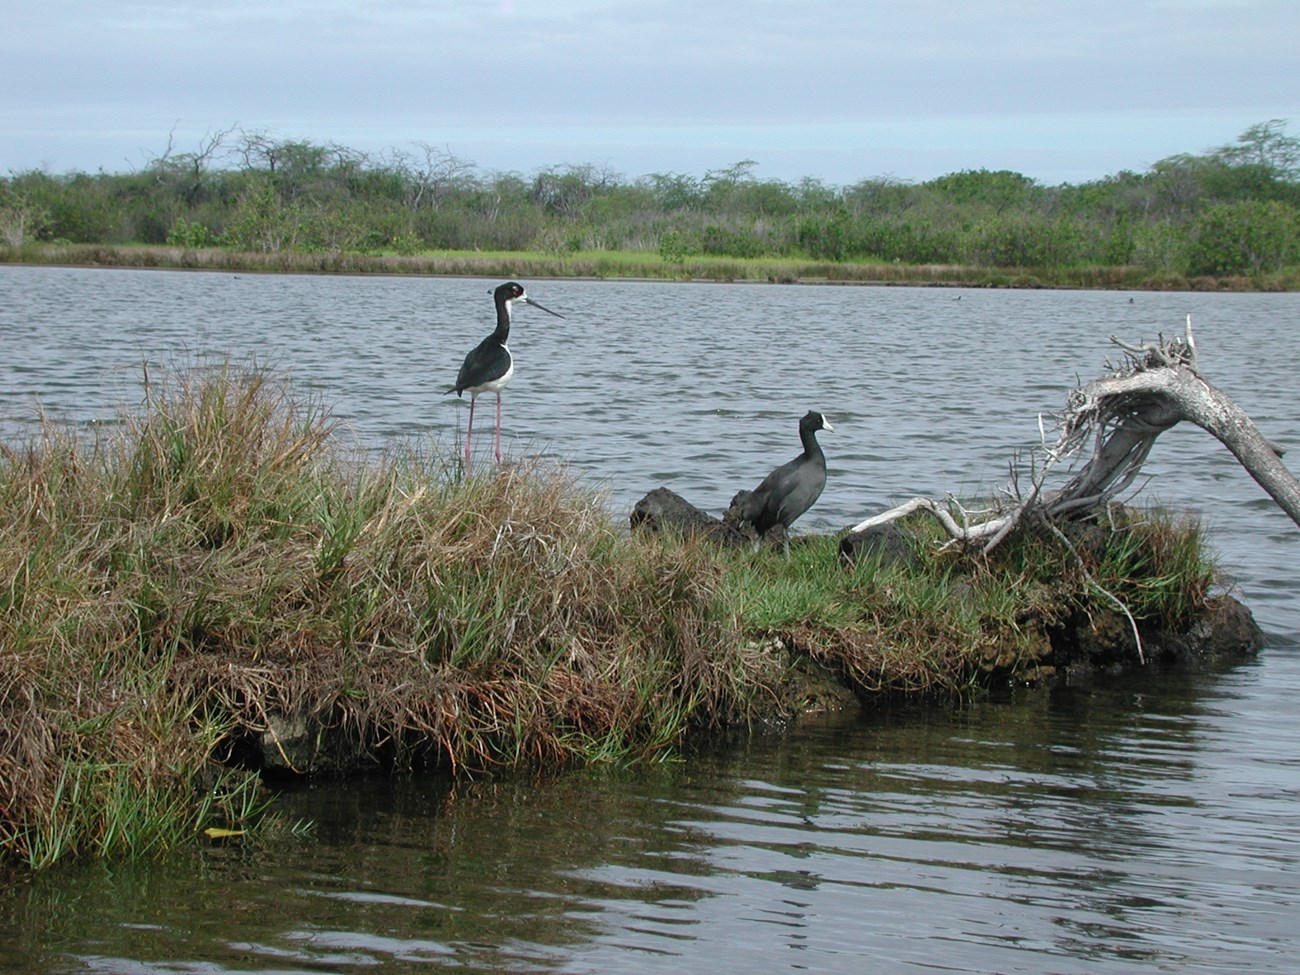 A Hawaiian Stilt and a Coot forage for food in a fishpond